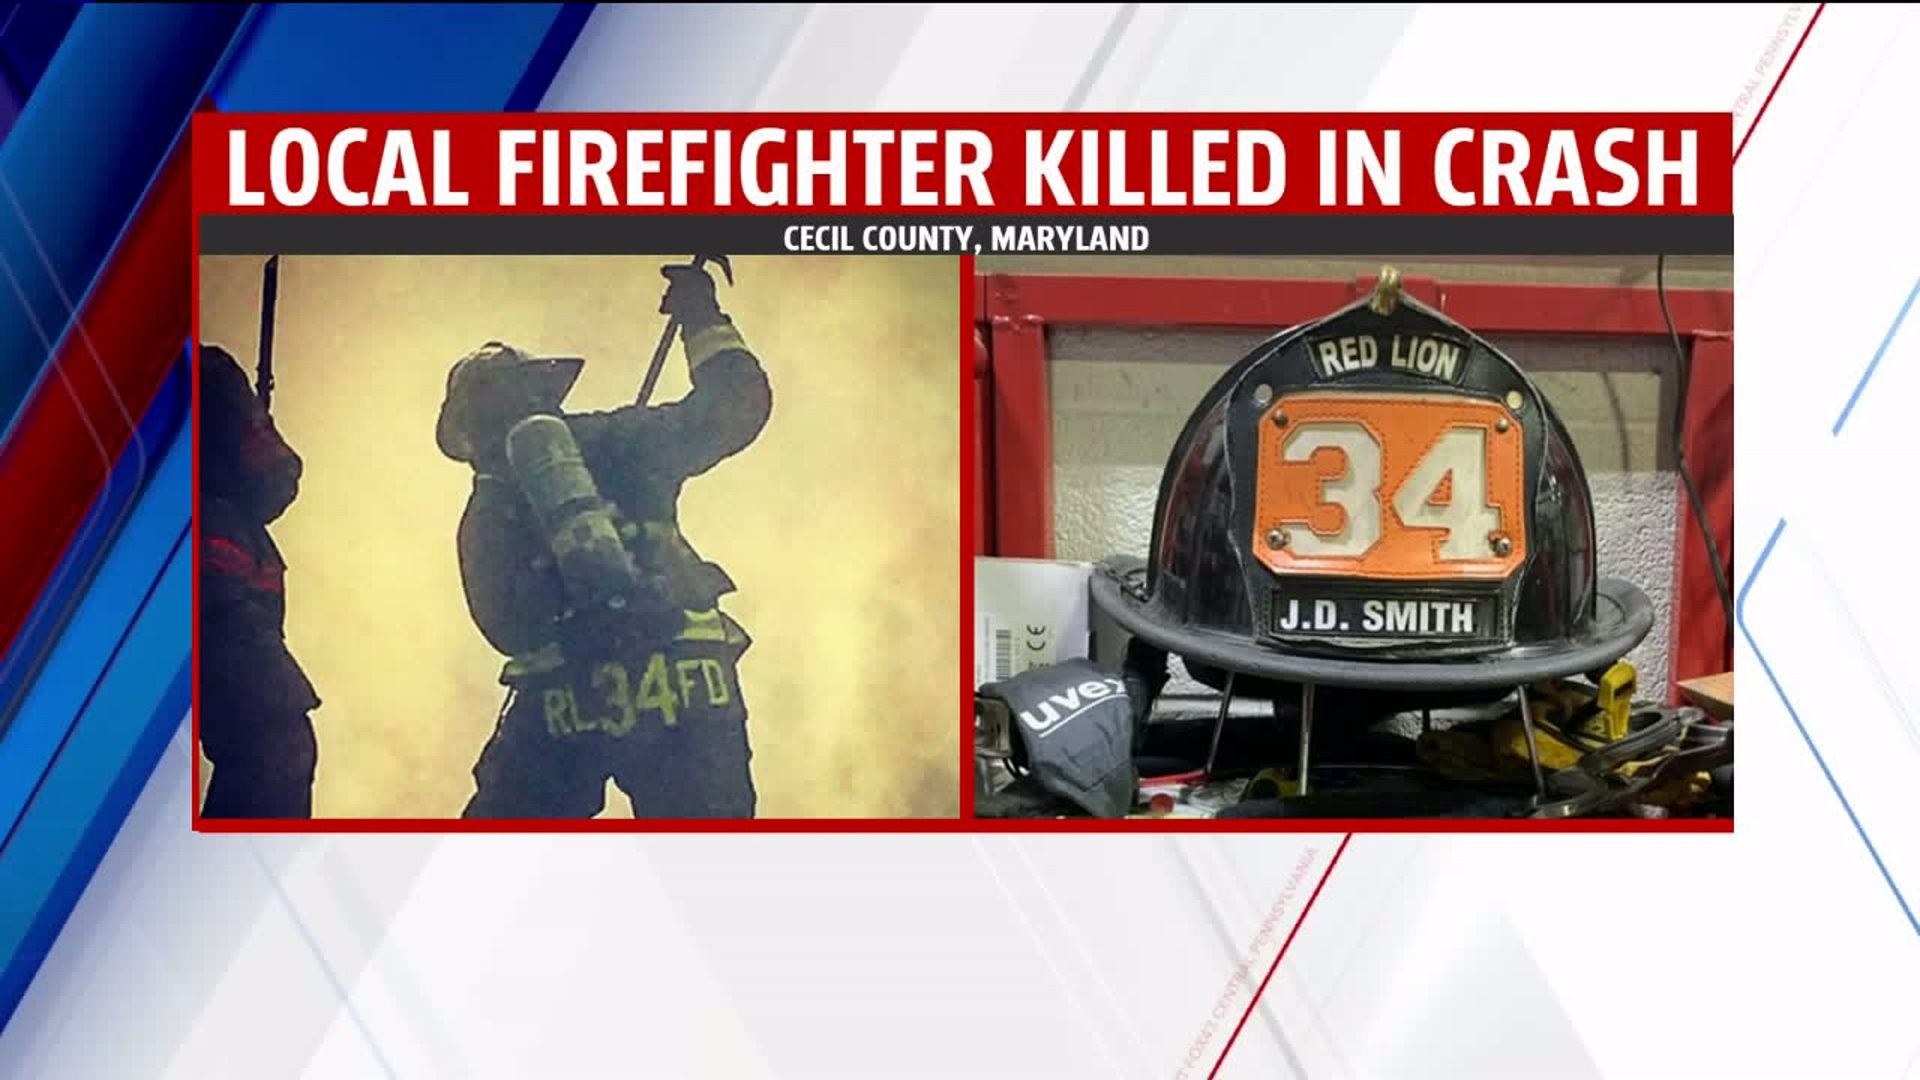 Local Firefighter Killed in Crash